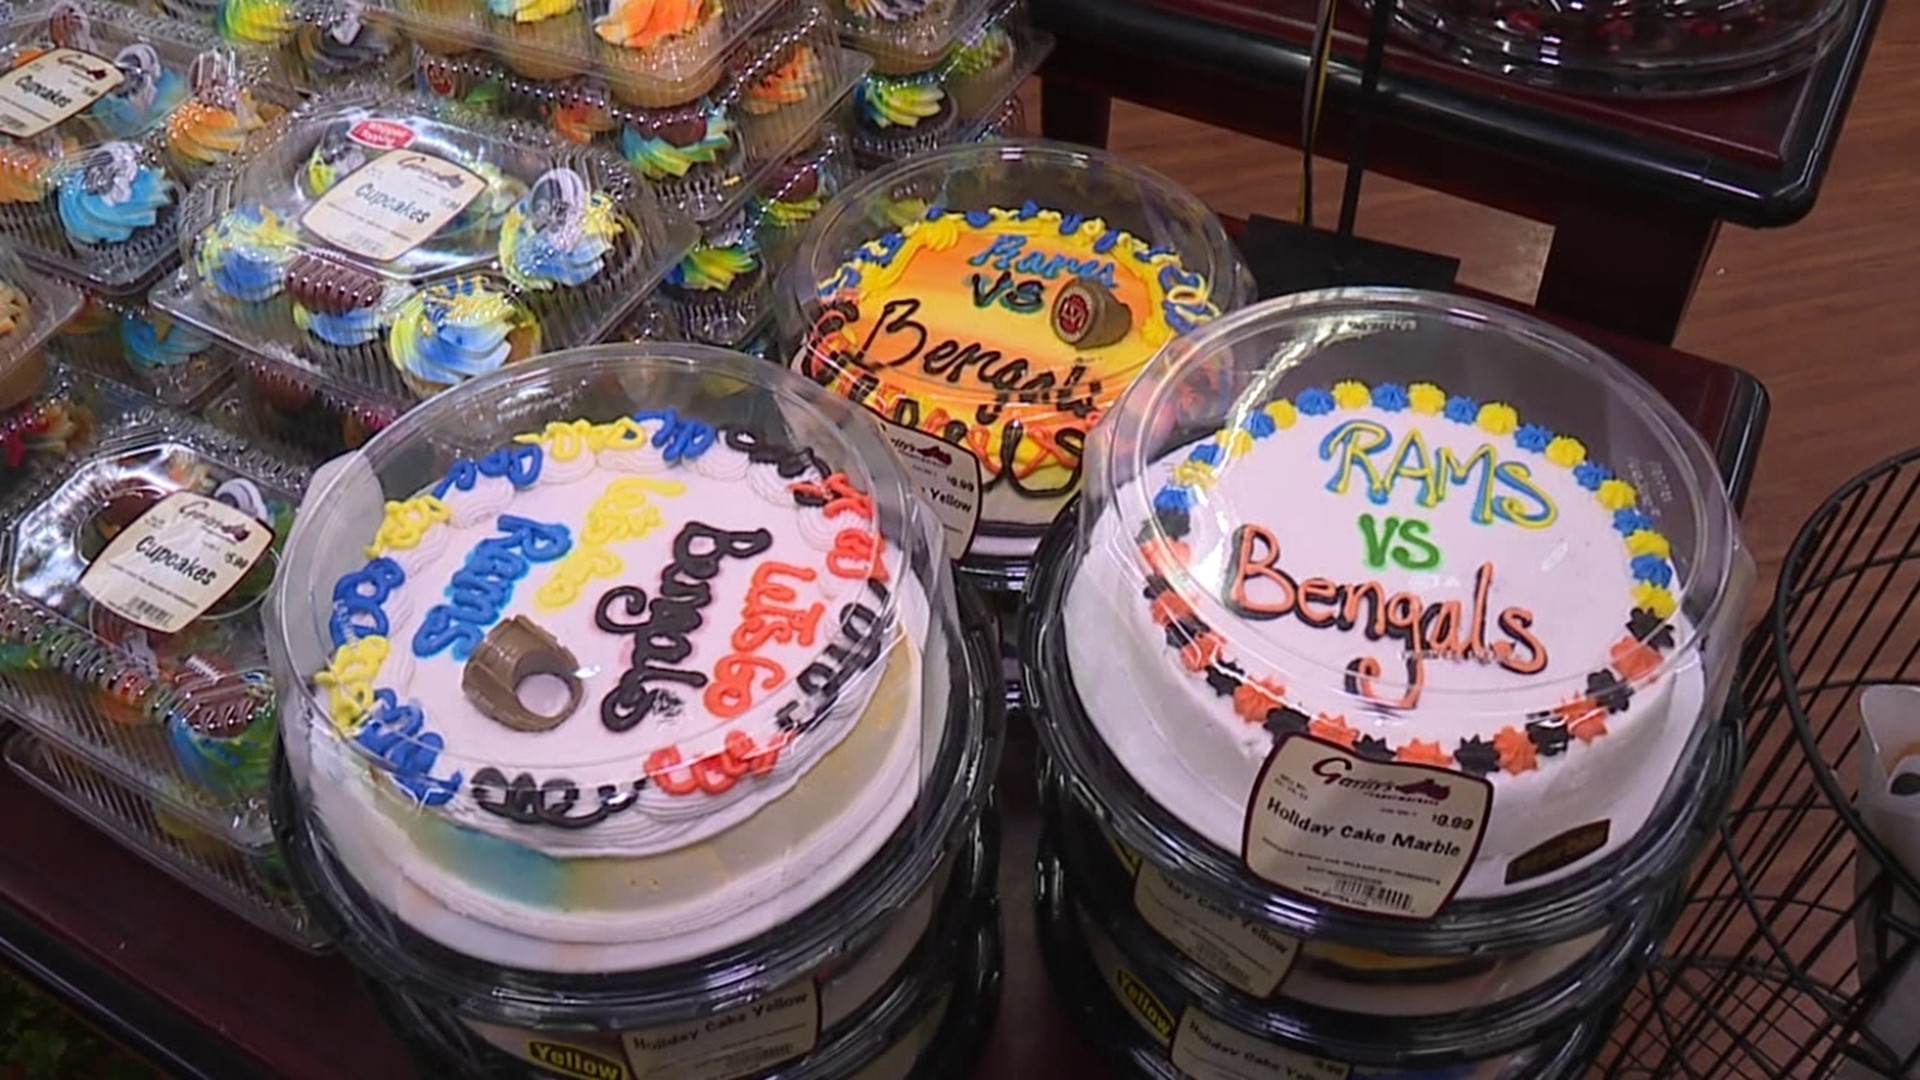 Grocery stores in our area are busy with people looking to score some game-day snacks.